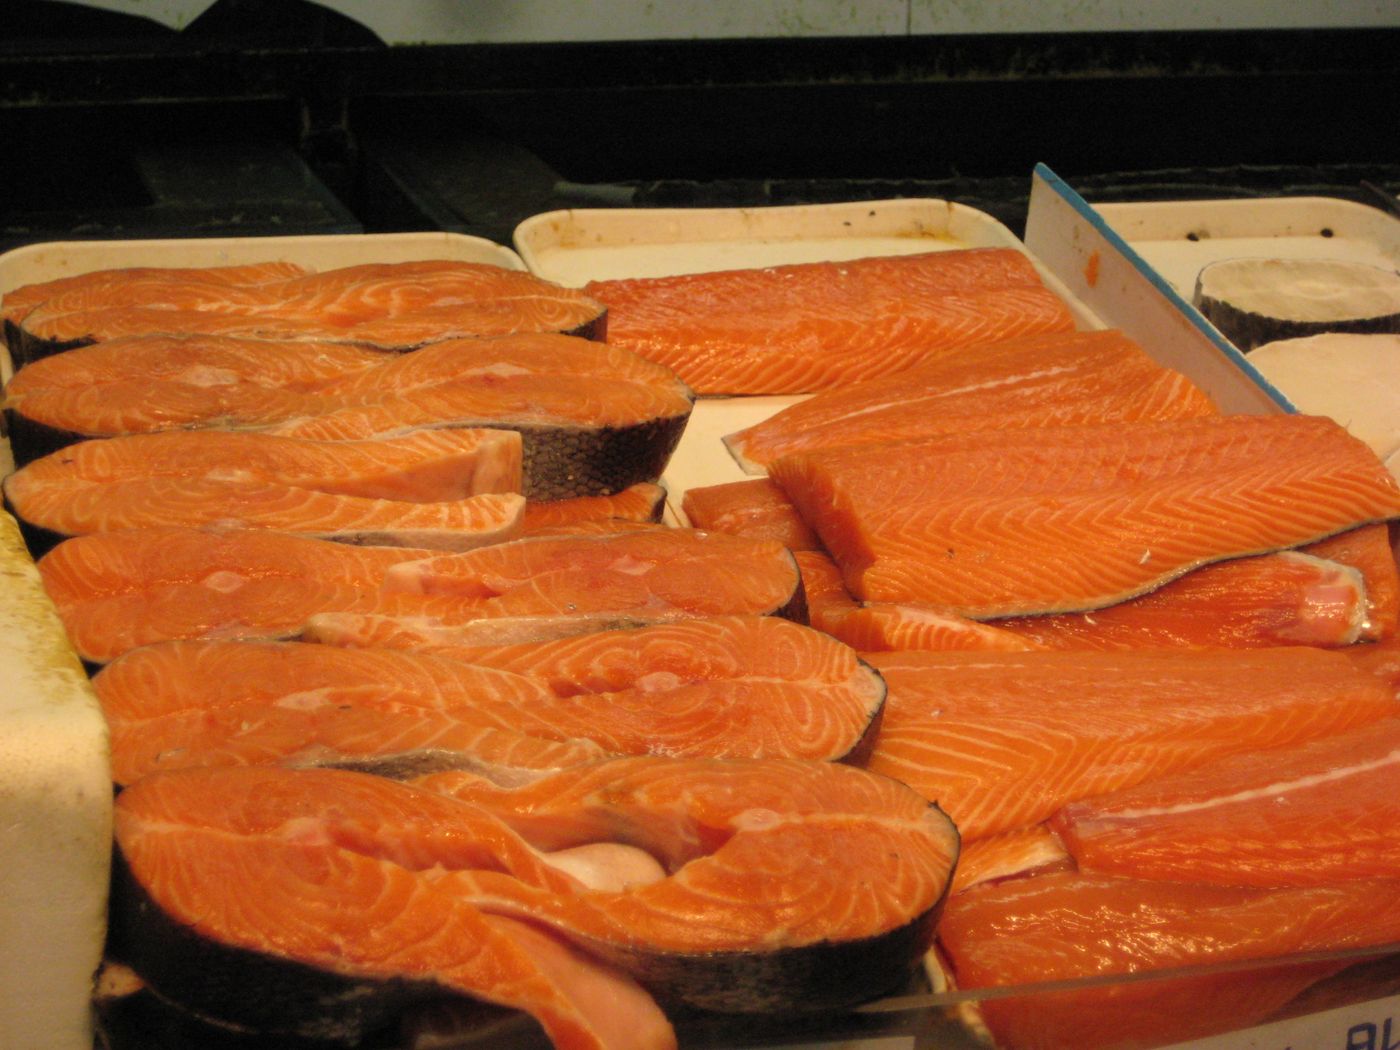 Canada approves GM salmon for sale in public supermarkets.